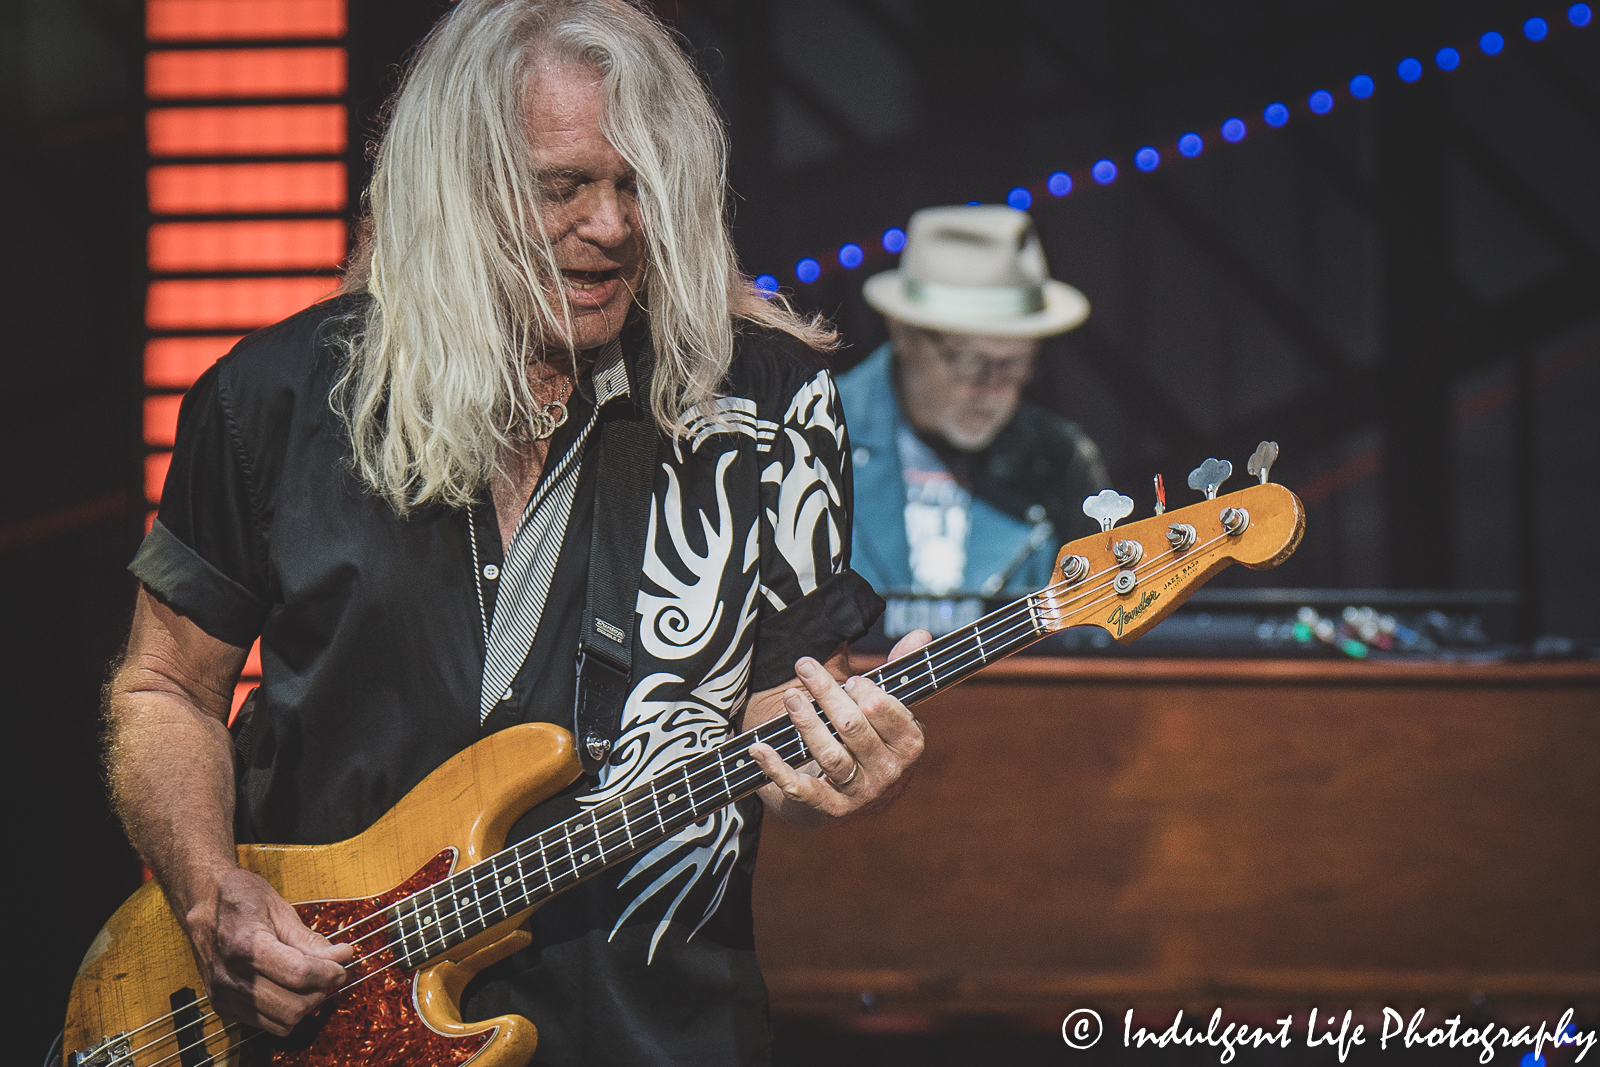 Bass player Bruce Hall and keyboardist Neal Doughty live in concert together at Starlight Theatre in Kansas City, MO on June 14, 2022.